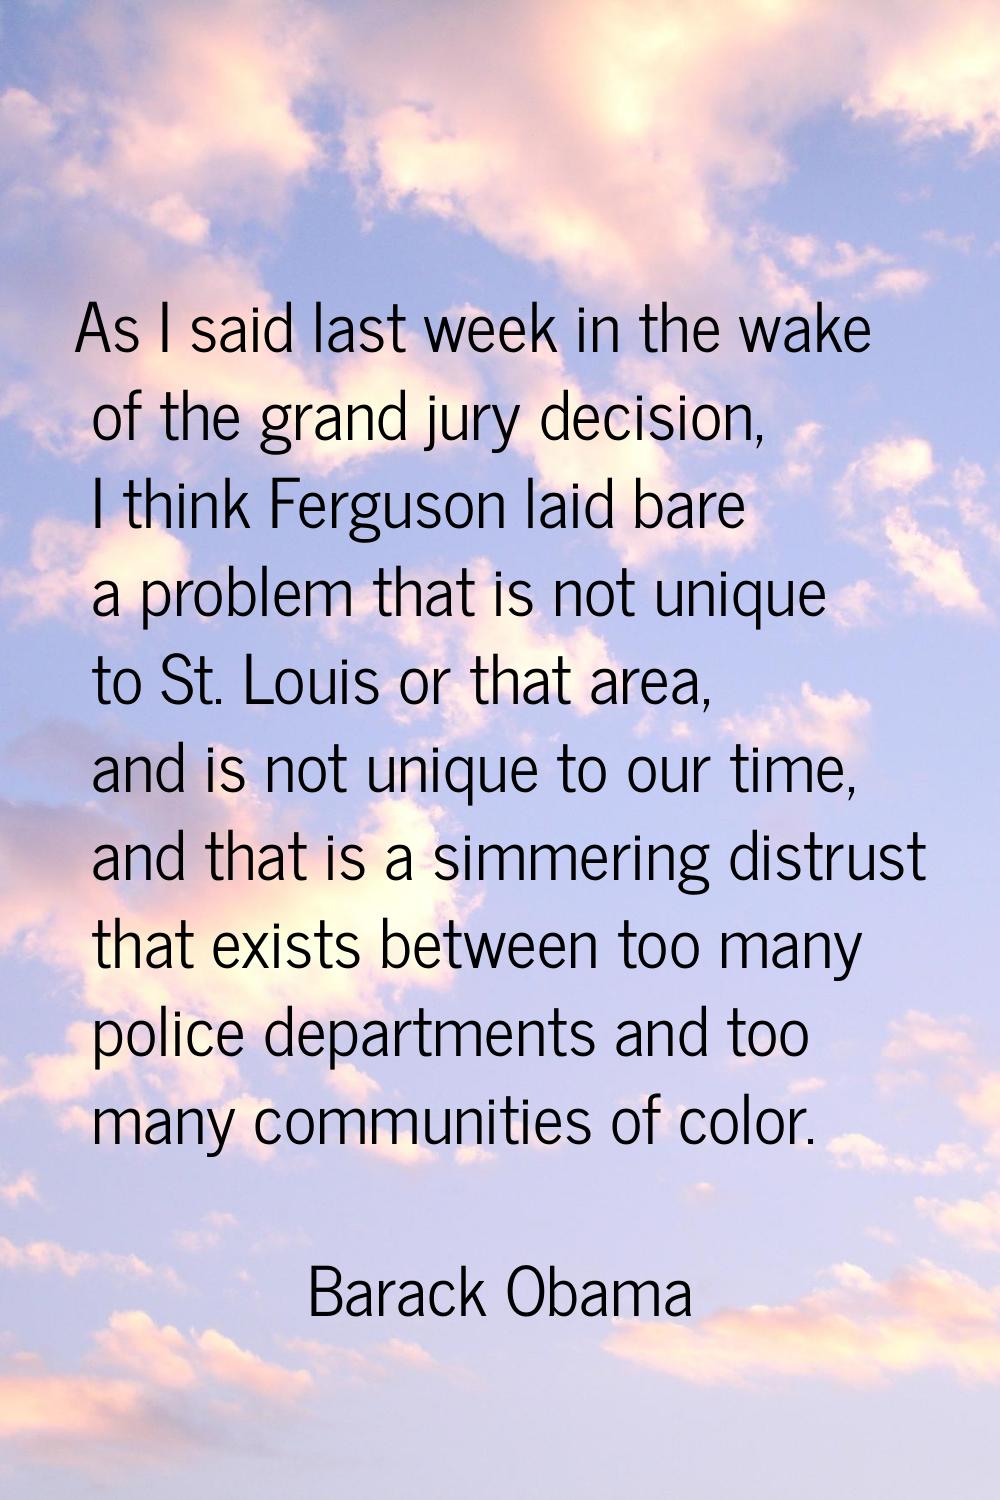 As I said last week in the wake of the grand jury decision, I think Ferguson laid bare a problem th